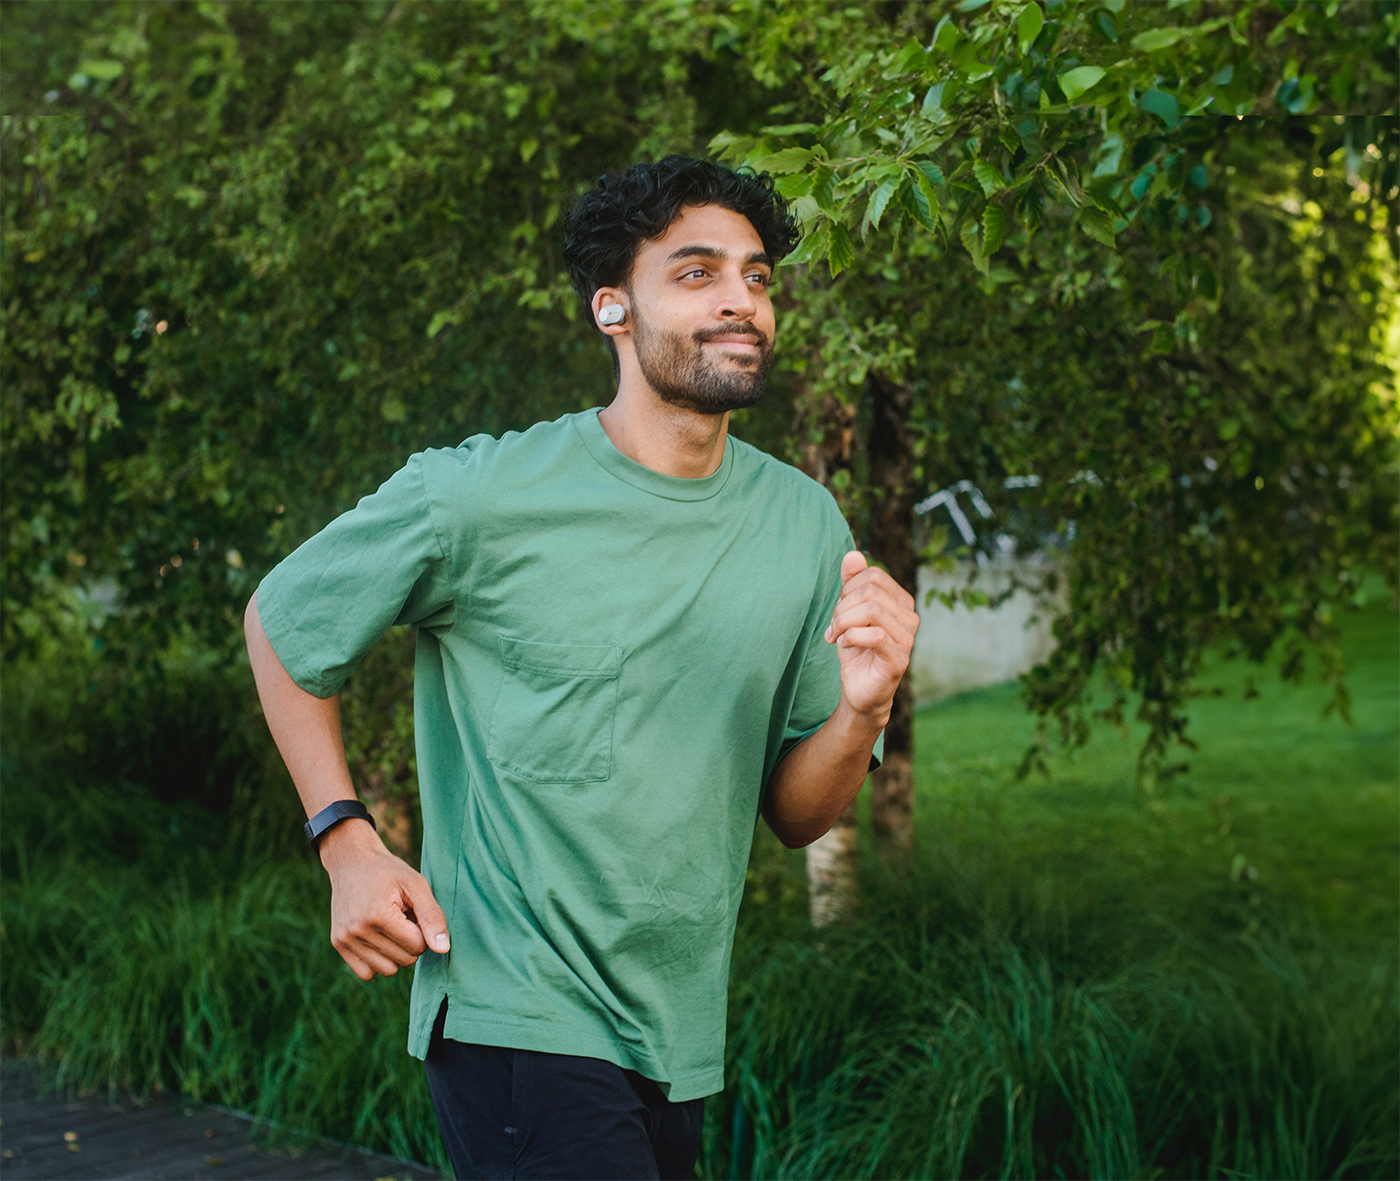 Man in green t-shirt running past trees in a park as part of an exercise routine and health management for type 1 diabetes.